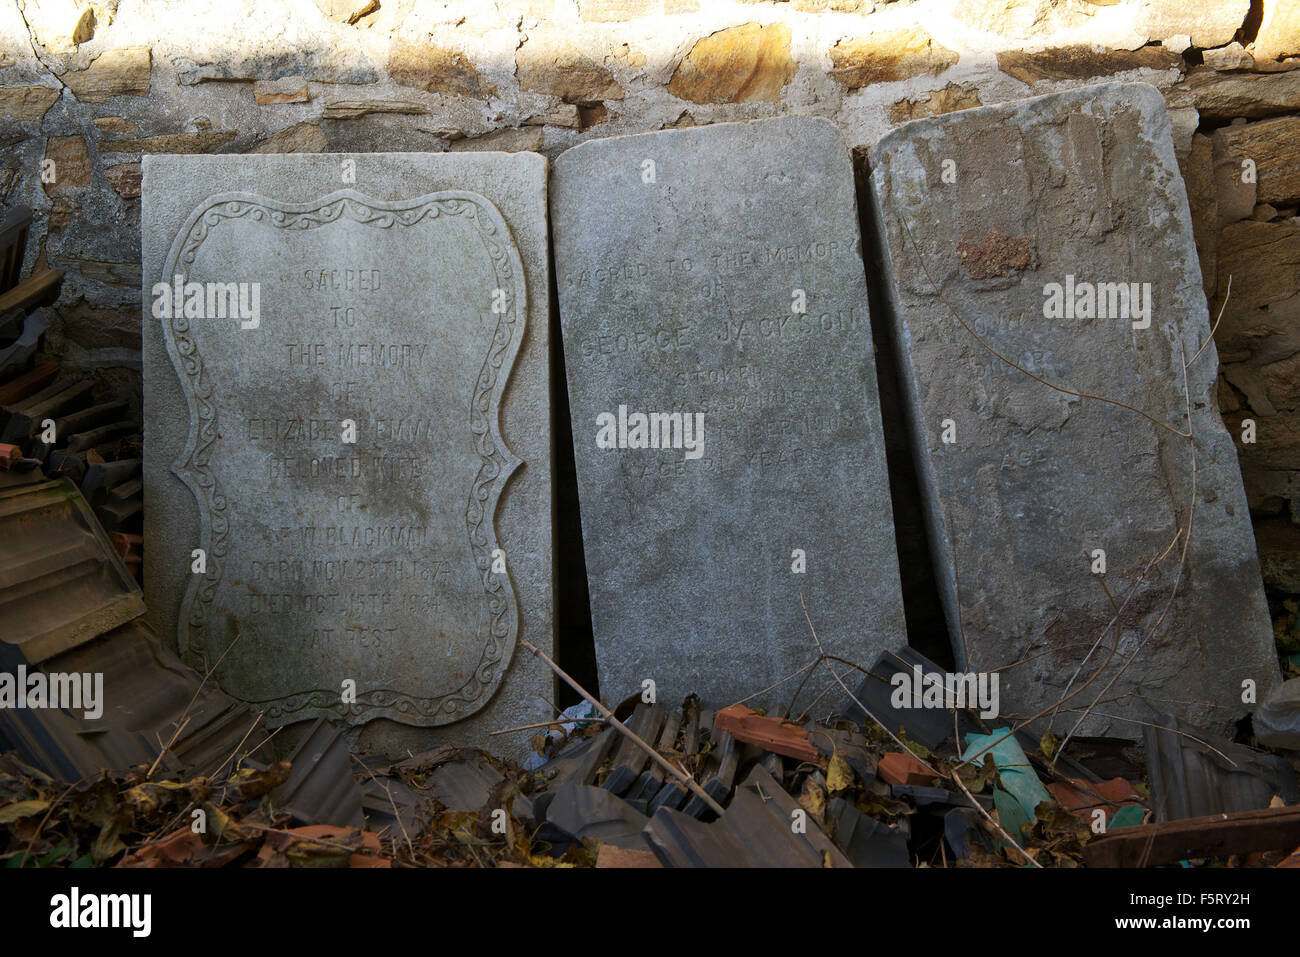 Headstones of British Navy sailors found in a corner of the compound of former British Navy Barracks in Liugong Island. Stock Photo